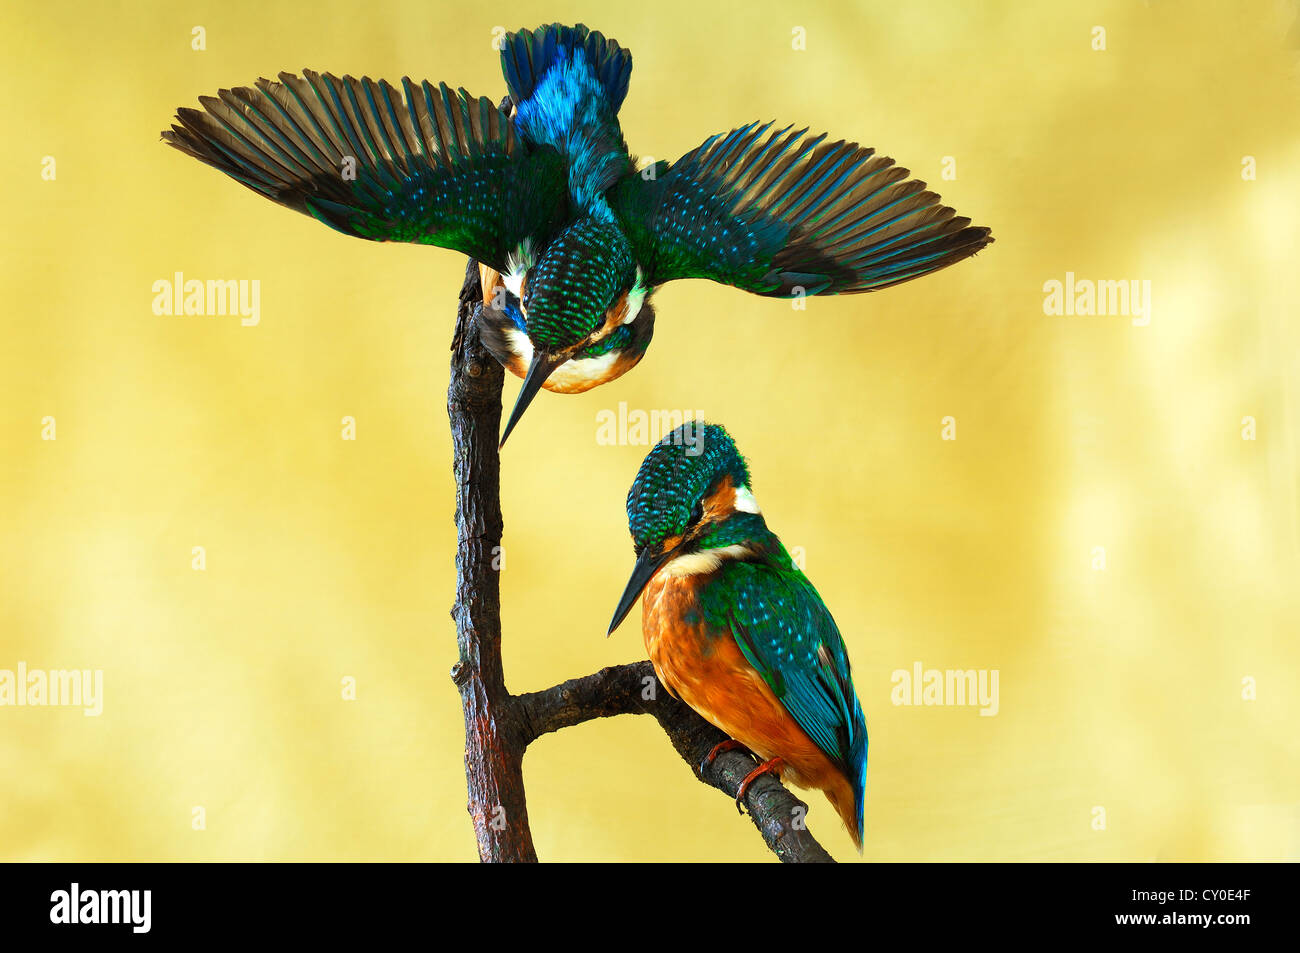 Taxidermied animals, two Kingfishers (Alcedo atthis), 2012 Special Exhibition, Museum of Industry, Sichartstrasse 5-25 Stock Photo